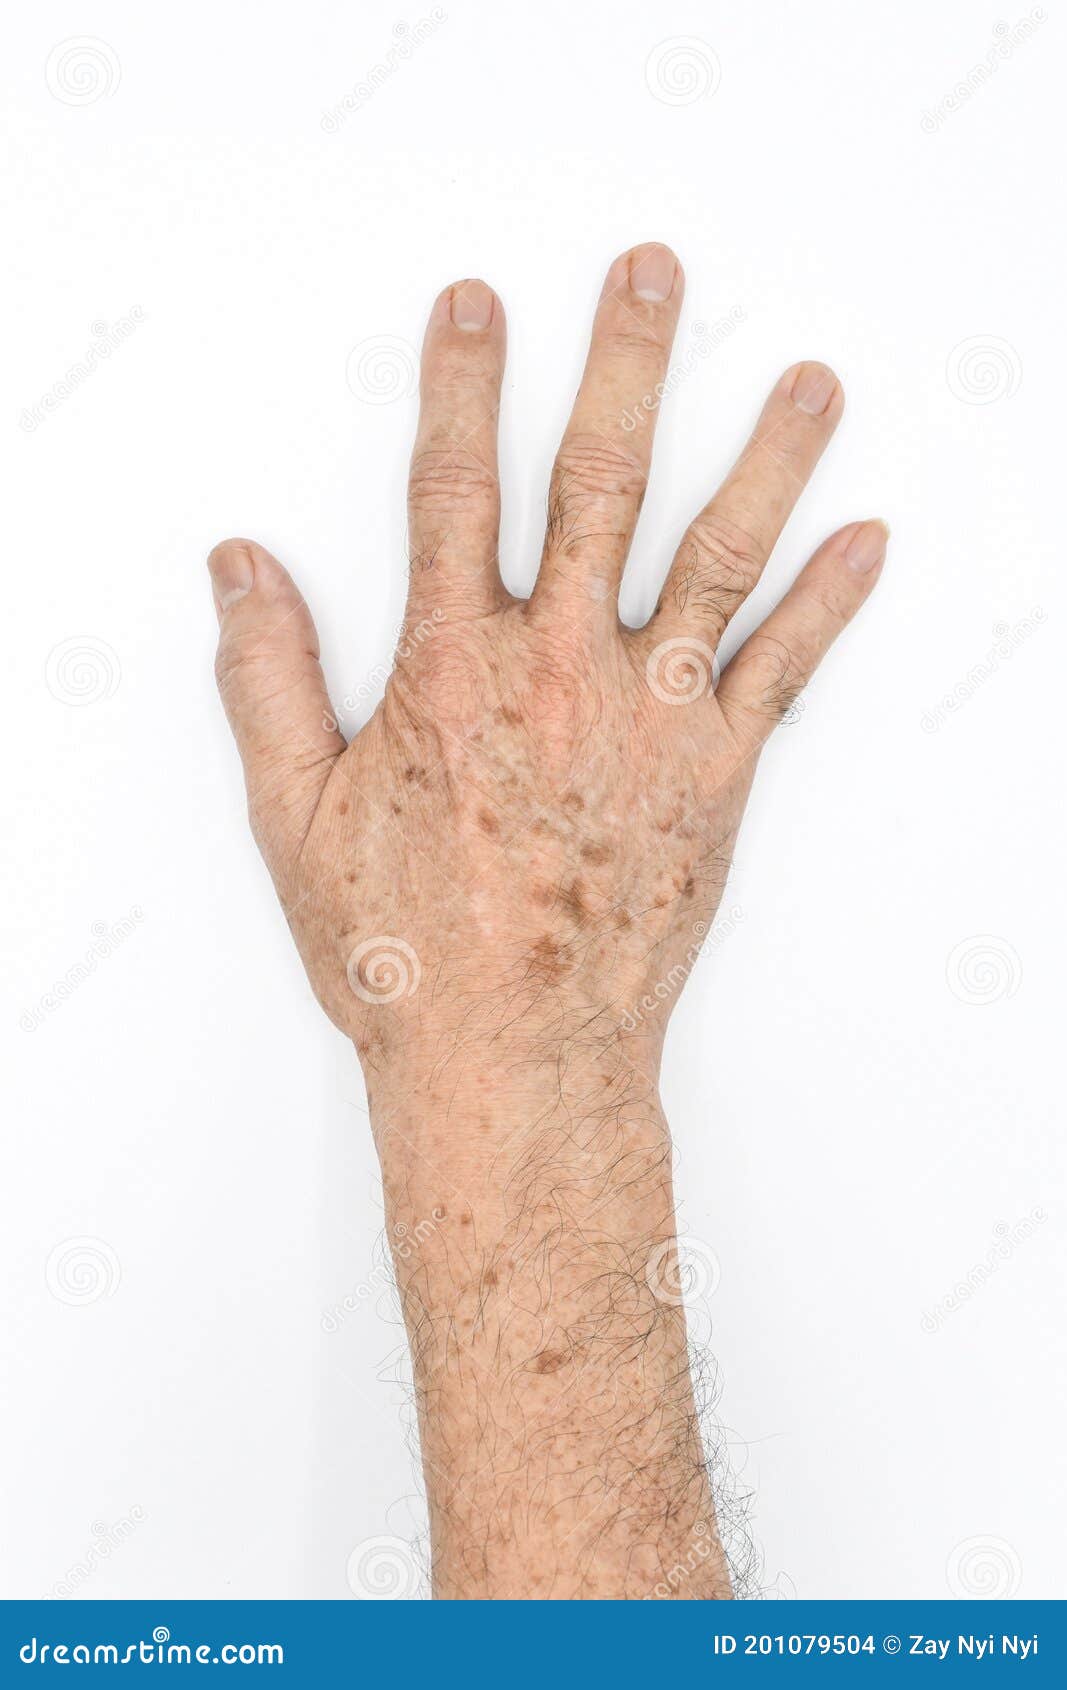 age spots on hand of asian elder man. they are brown, gray, or black spots and also called liver spots, senile lentigo, solar